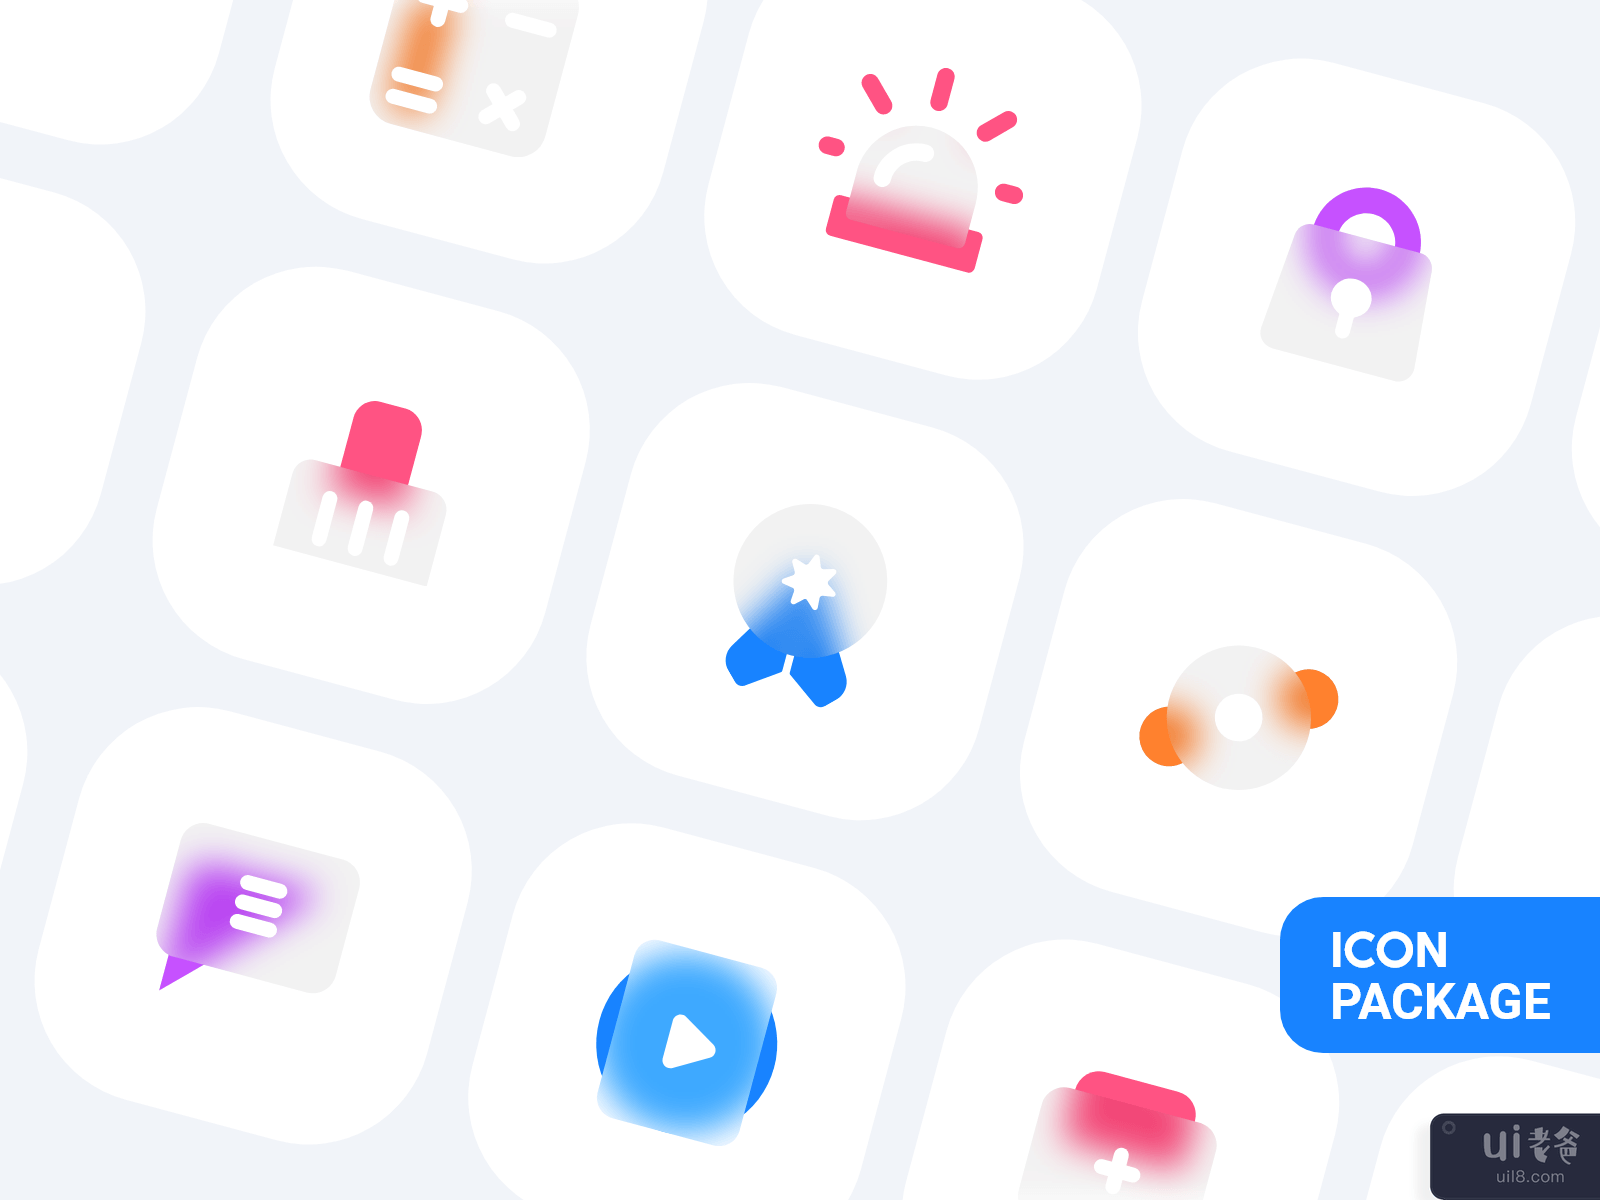 Icon package v 2.0